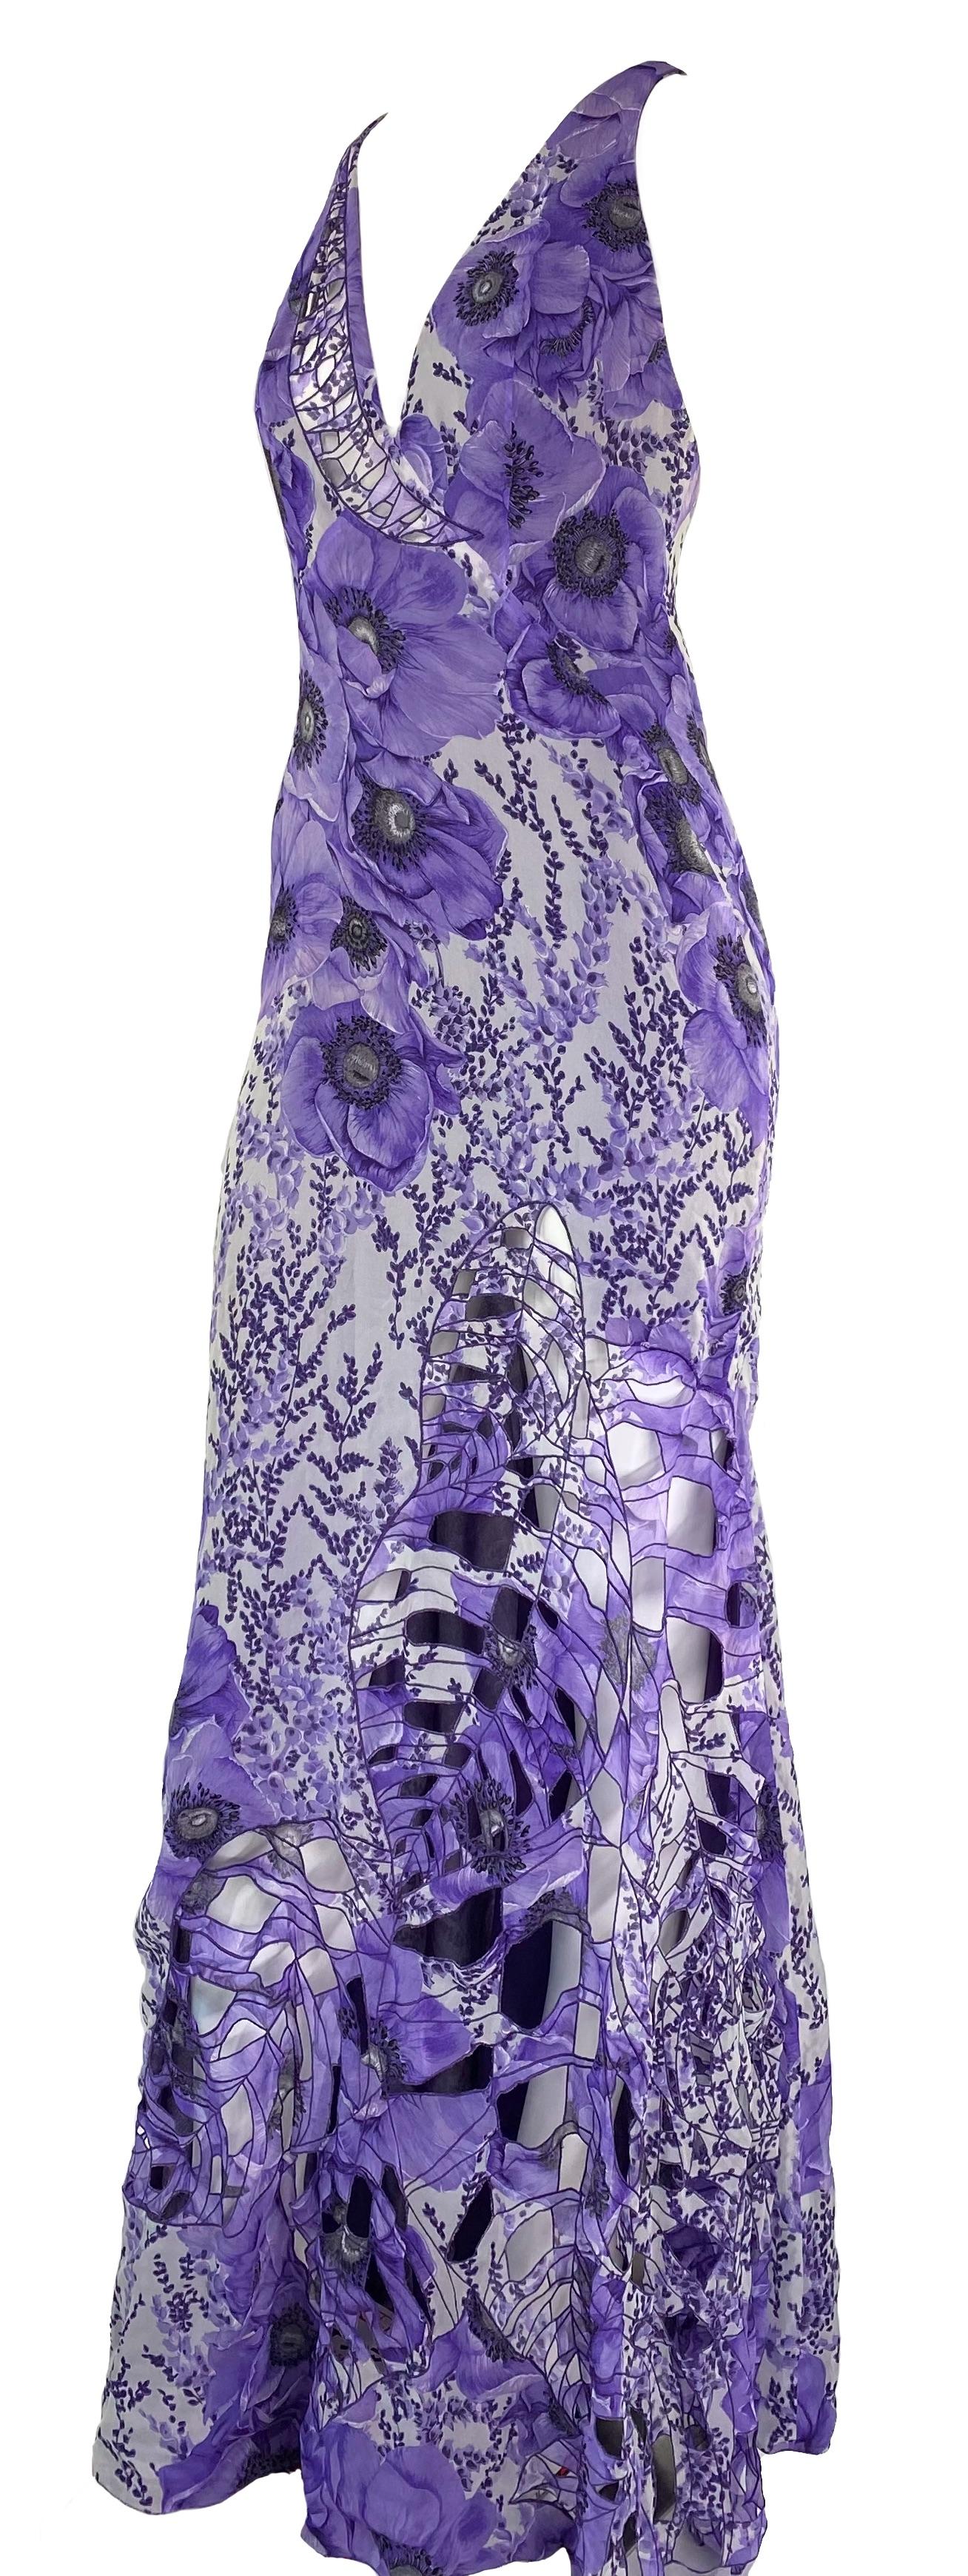 Presenting a gorgeous purple poppy print cut-out full-length gown designed by Donatella Versace. This rare piece features an interior zipped corset and the poppy print that debuted on the Fall/Winter 2001 Atelier Versace haute couture runway in